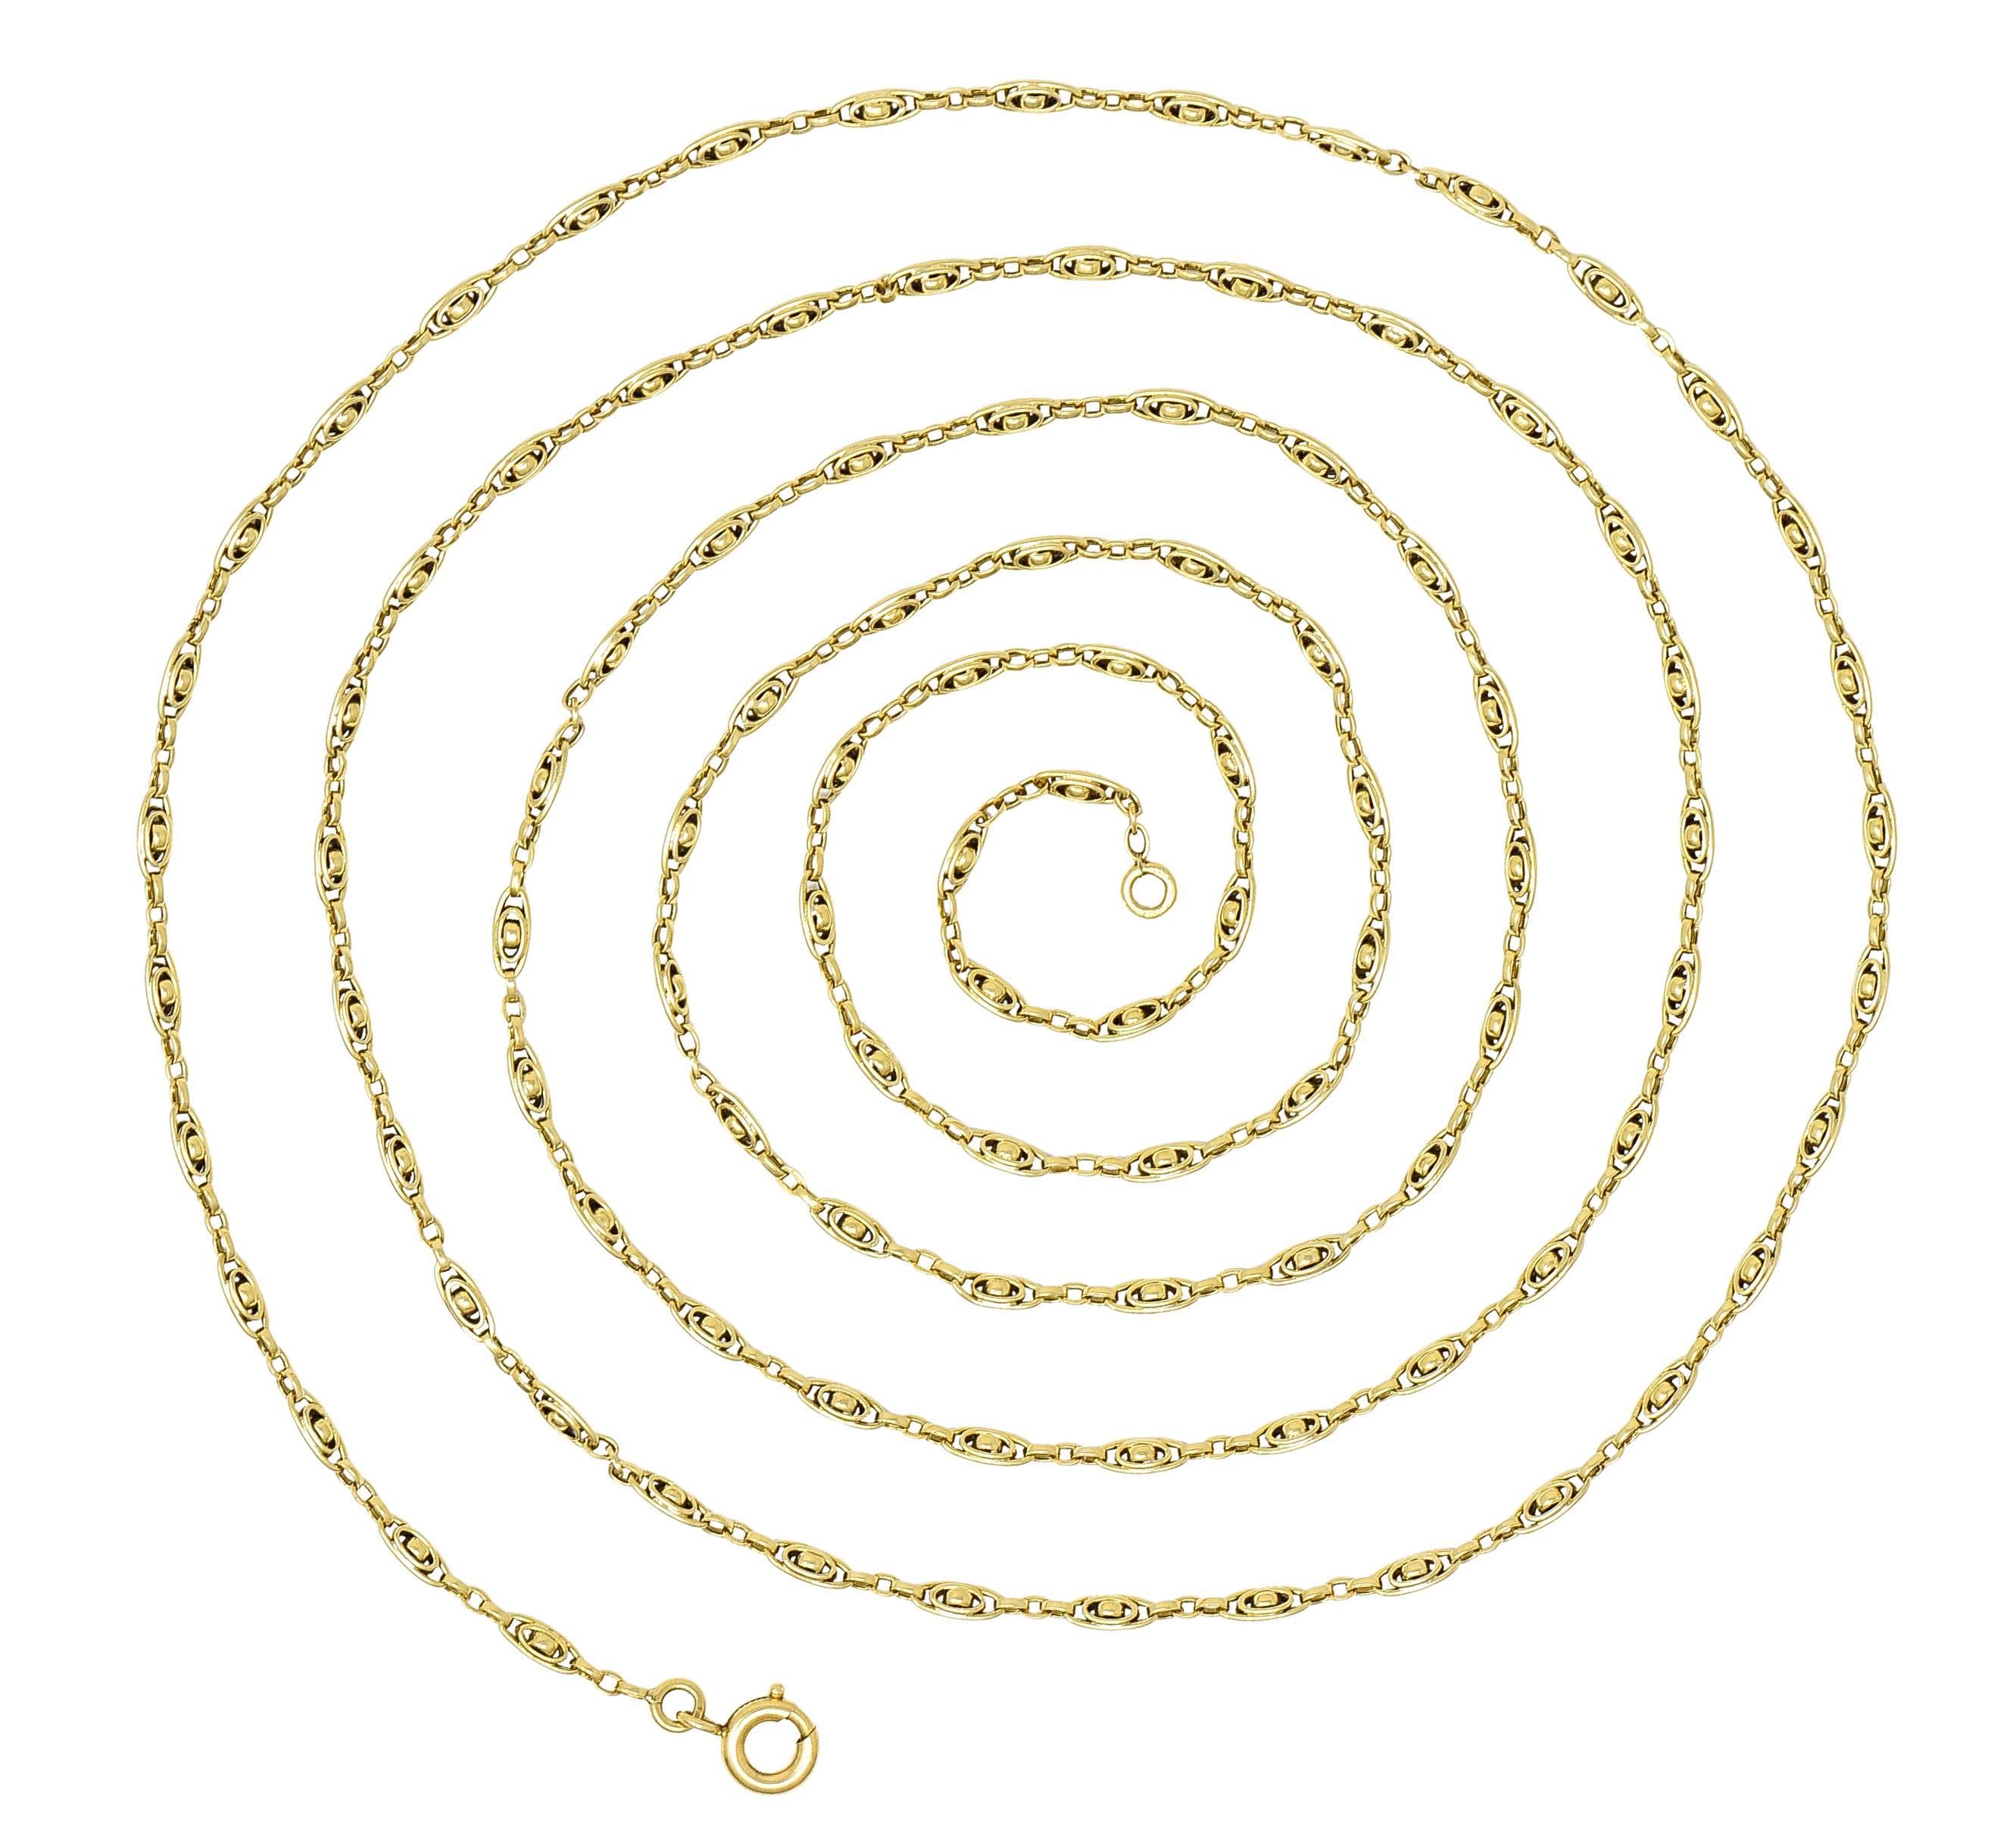 Chain is comprised of oval shaped links. Centering a smaller oval and gold bead. Alternating with oval shaped cable chain. Completed by large spring clasp closure. Stamped with French hallmarks for 18 karat gold. Circa: 1840's. Length: 58 1/2